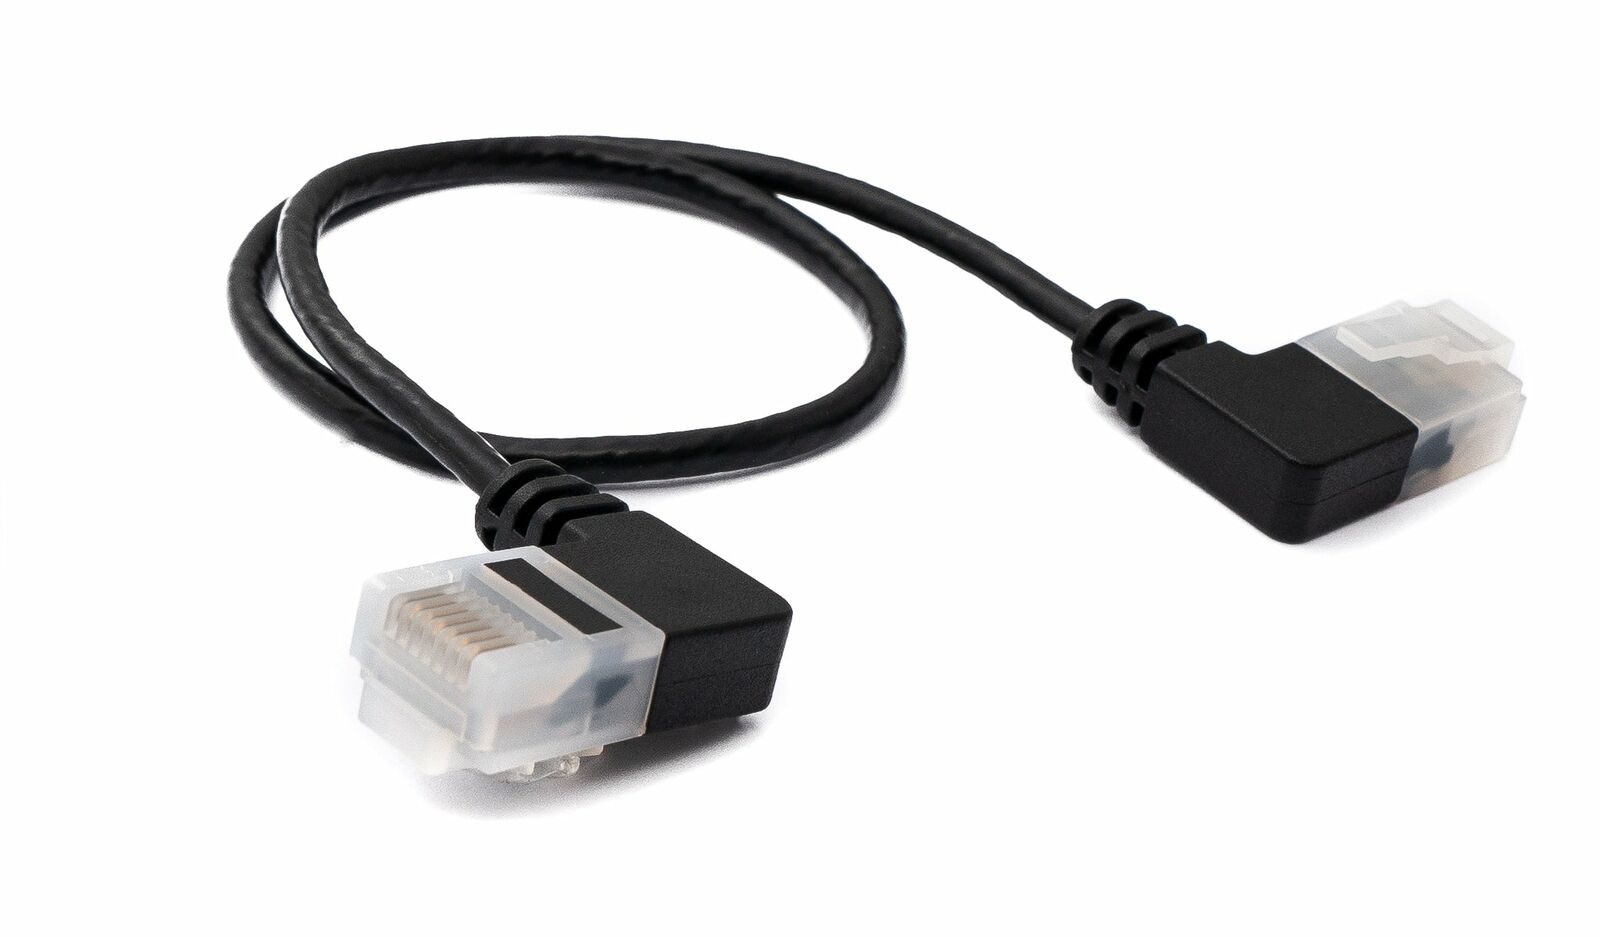 Lan Cable 9 13/16in RJ45 8P8C Stp Cat6 Plug To Plug Angle Adapter Case Black